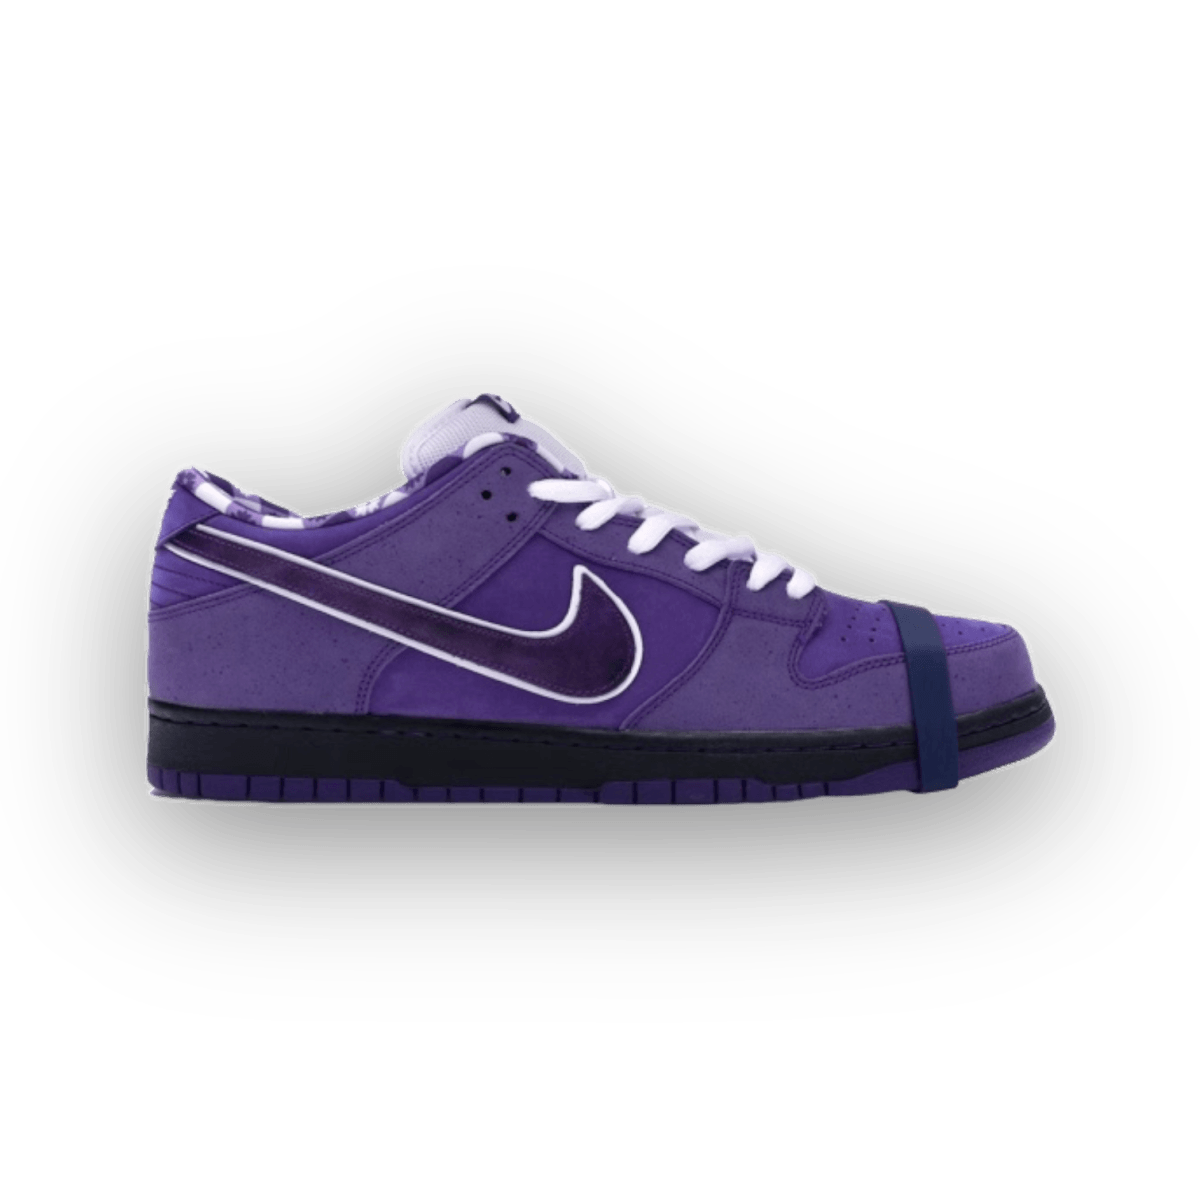 Dunk Low Concepts Purple Lobster - Low Sneaker - Dunks - Jawns on Fire